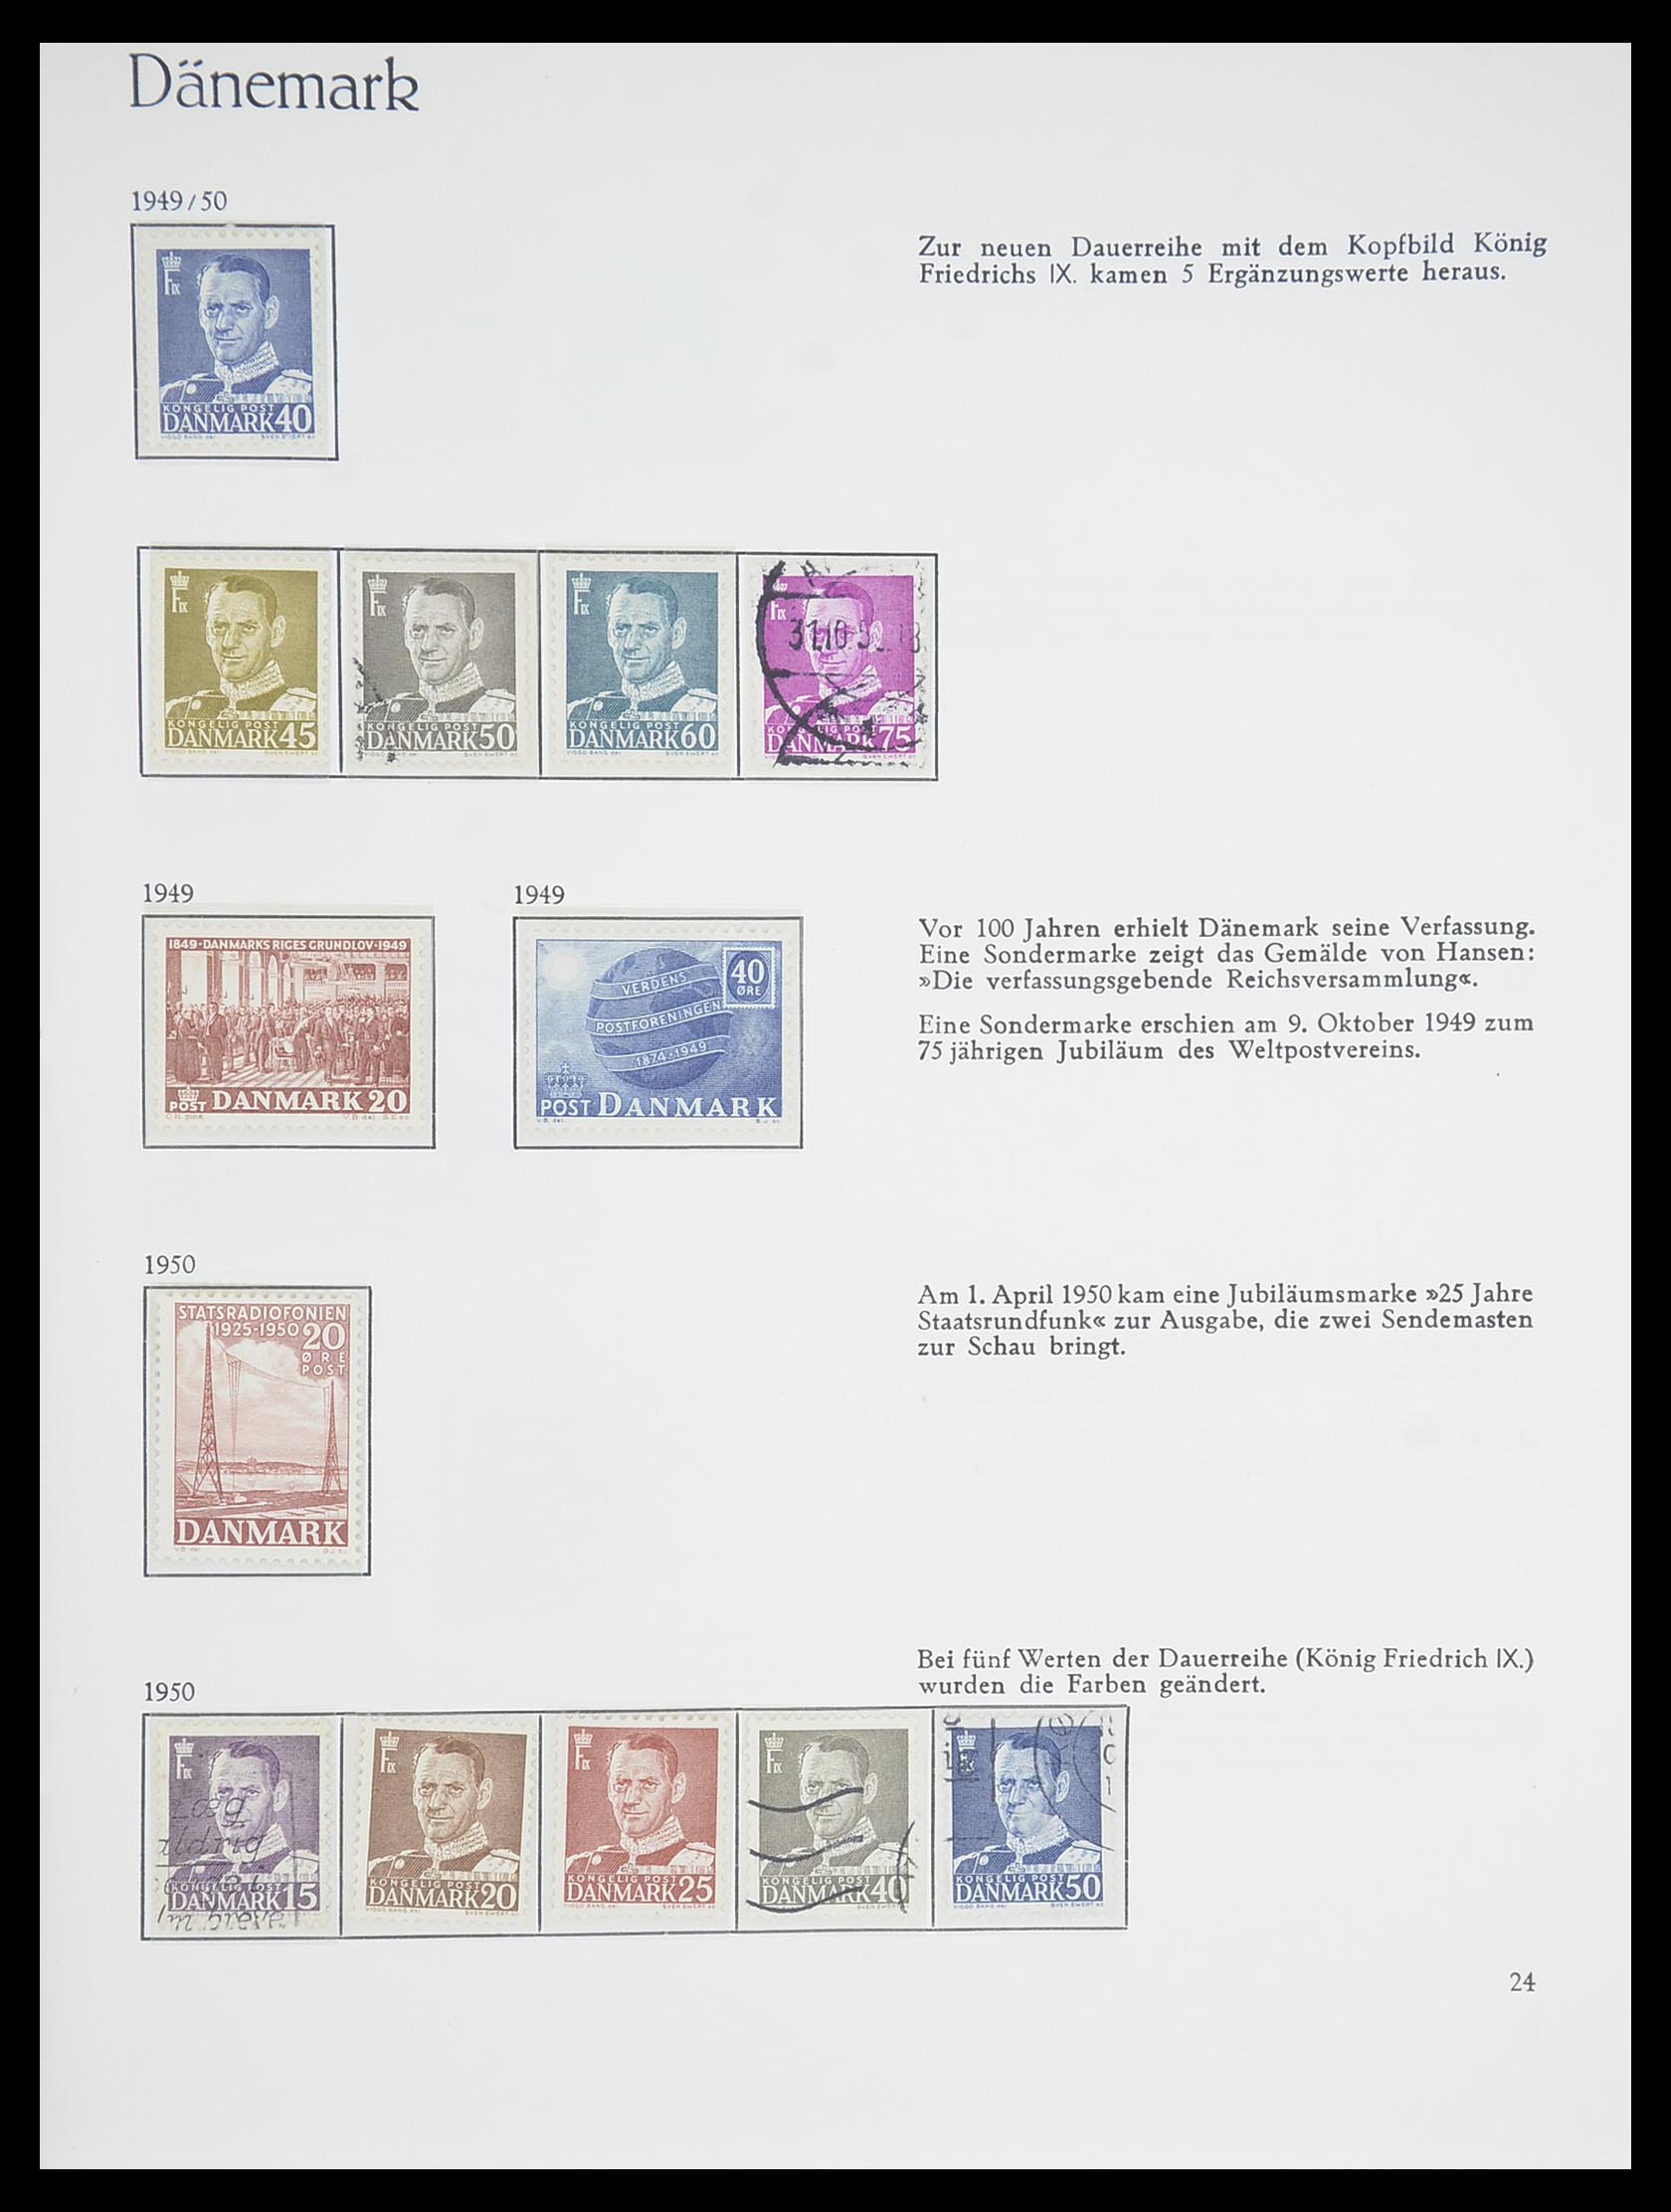 33708 024 - Stamp collection 33708 Denmark 1851-1970.